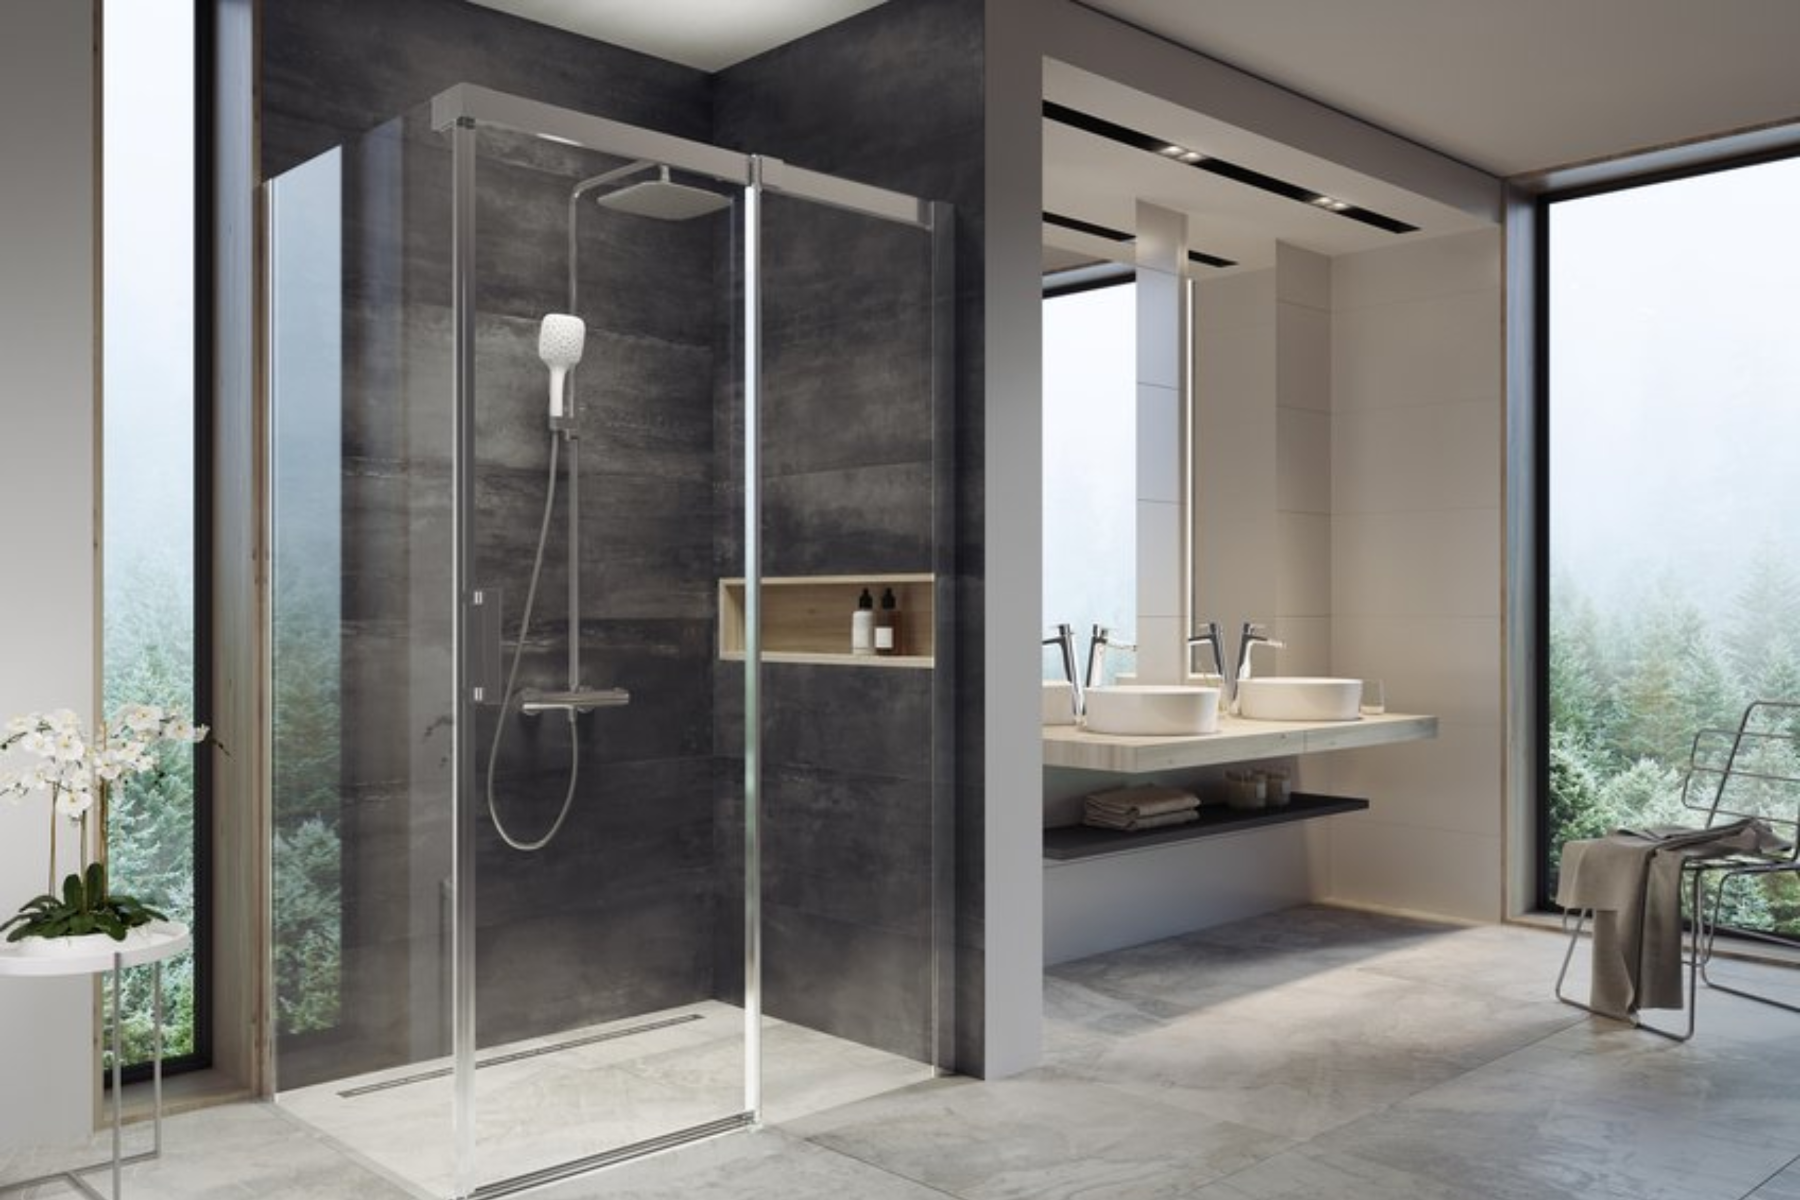 Full Bathroom Space With Walk In Thermostatic Shower Enclosure